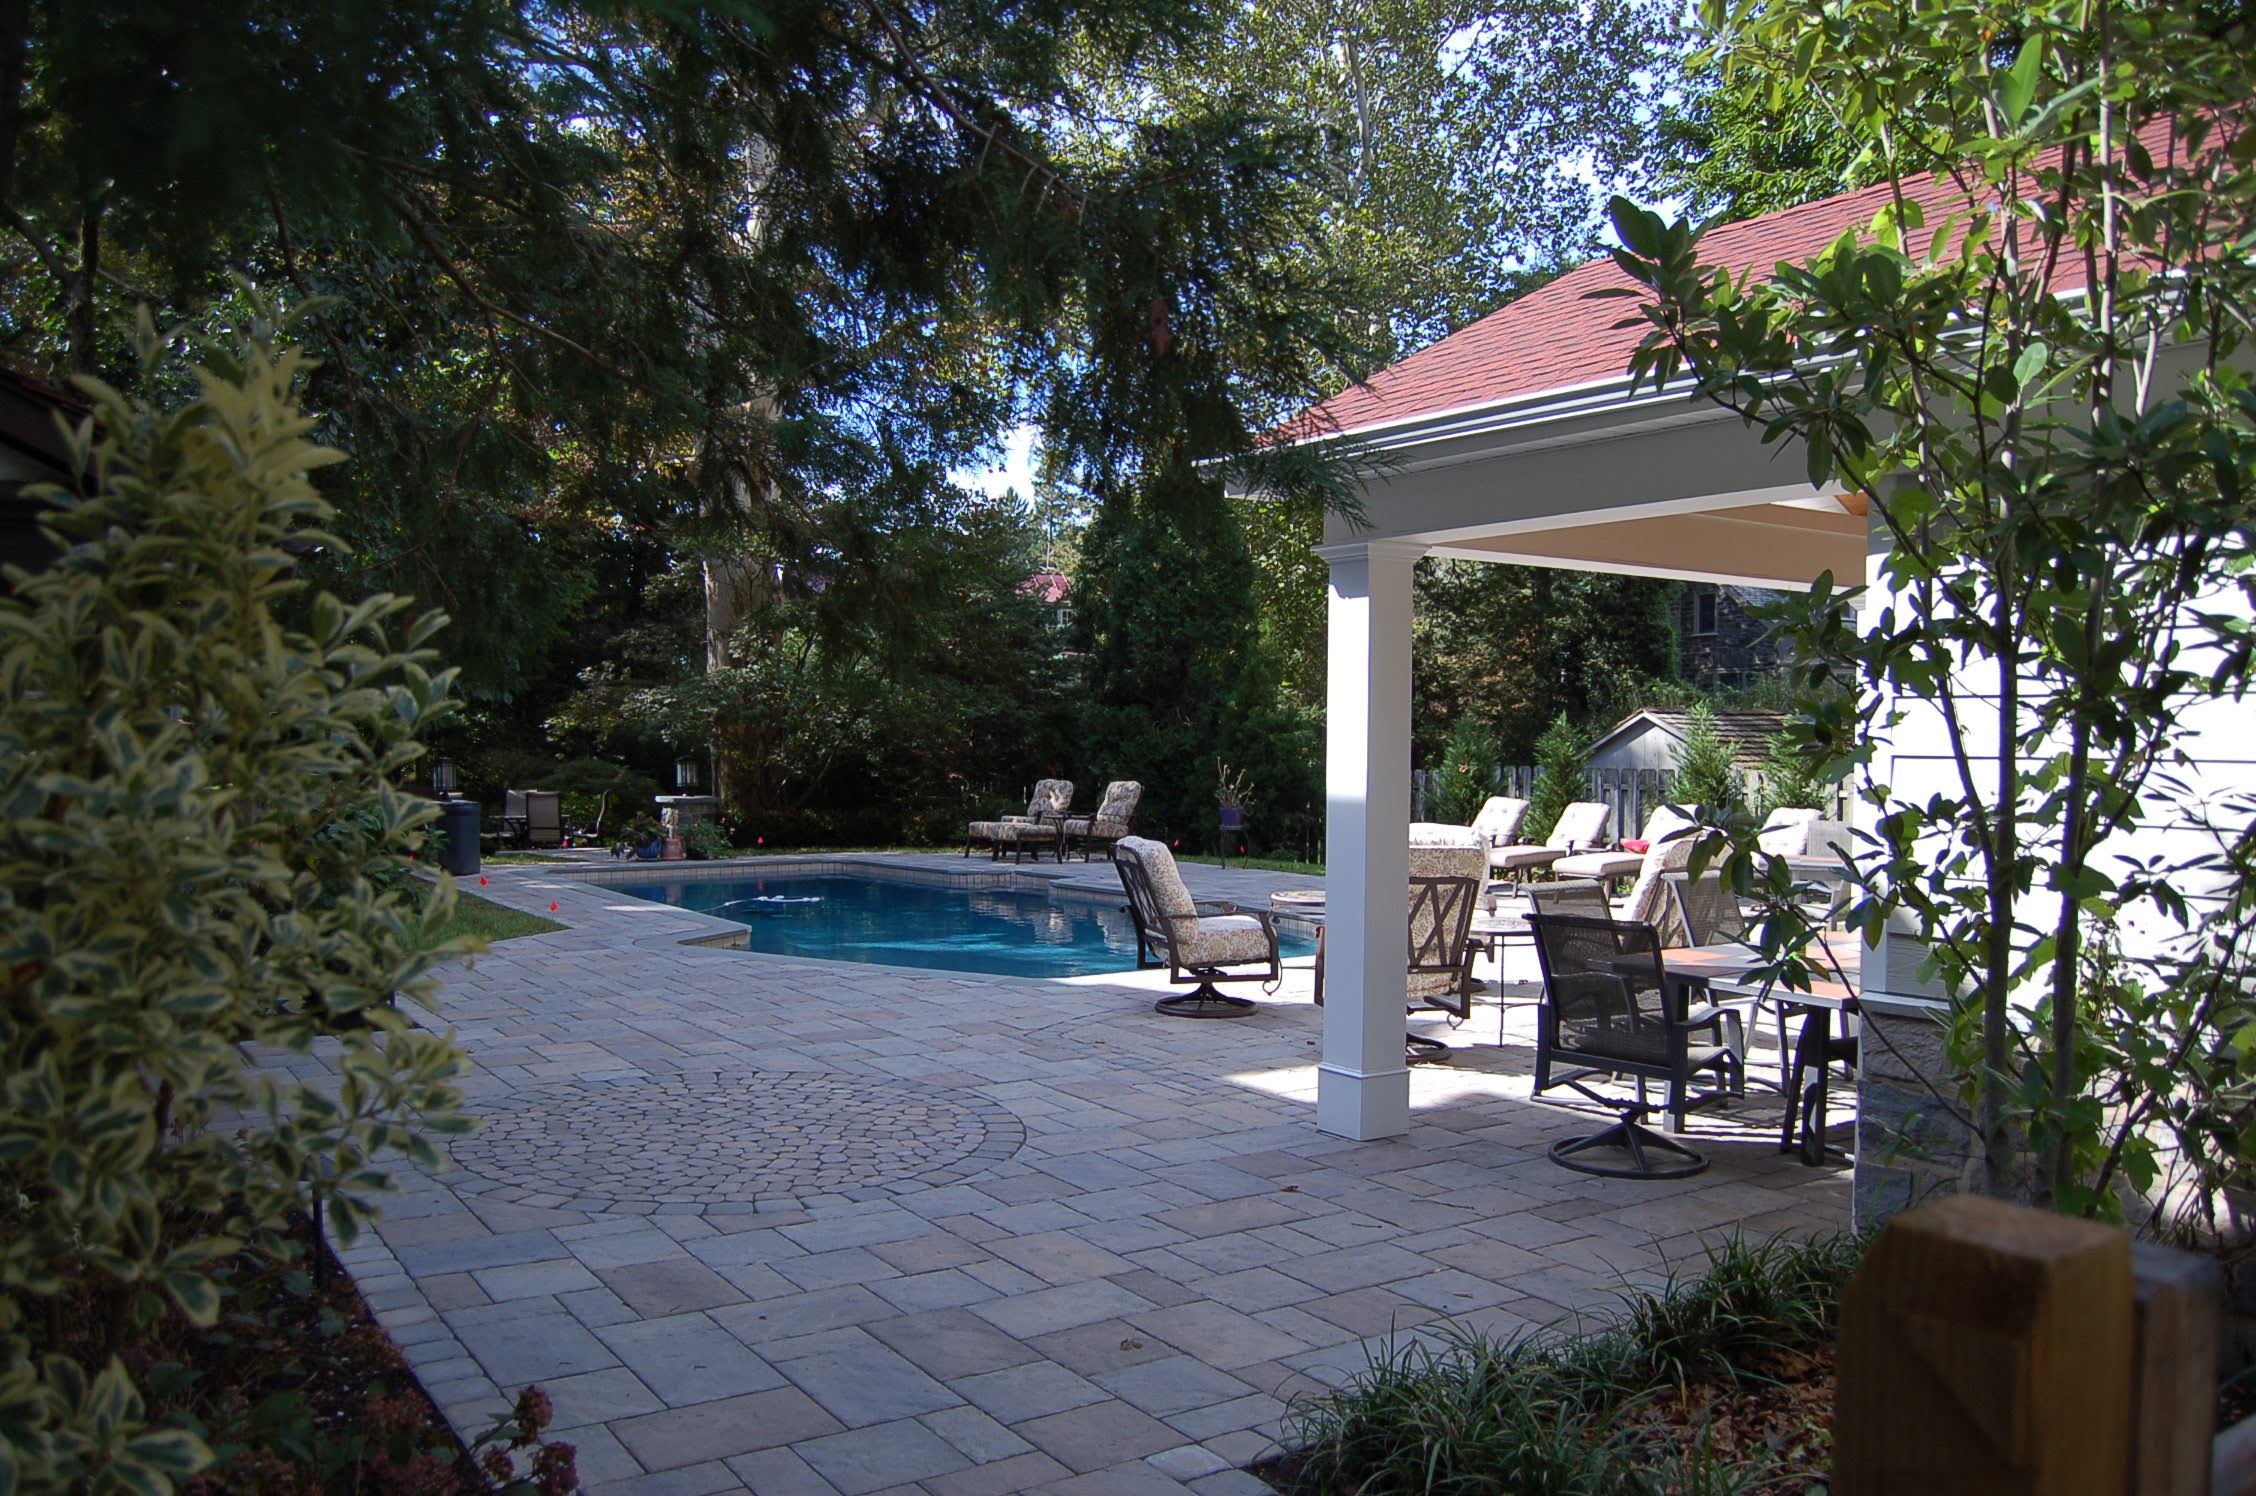 Pool paver patio and cabano designed and installed by CKC Landscaping